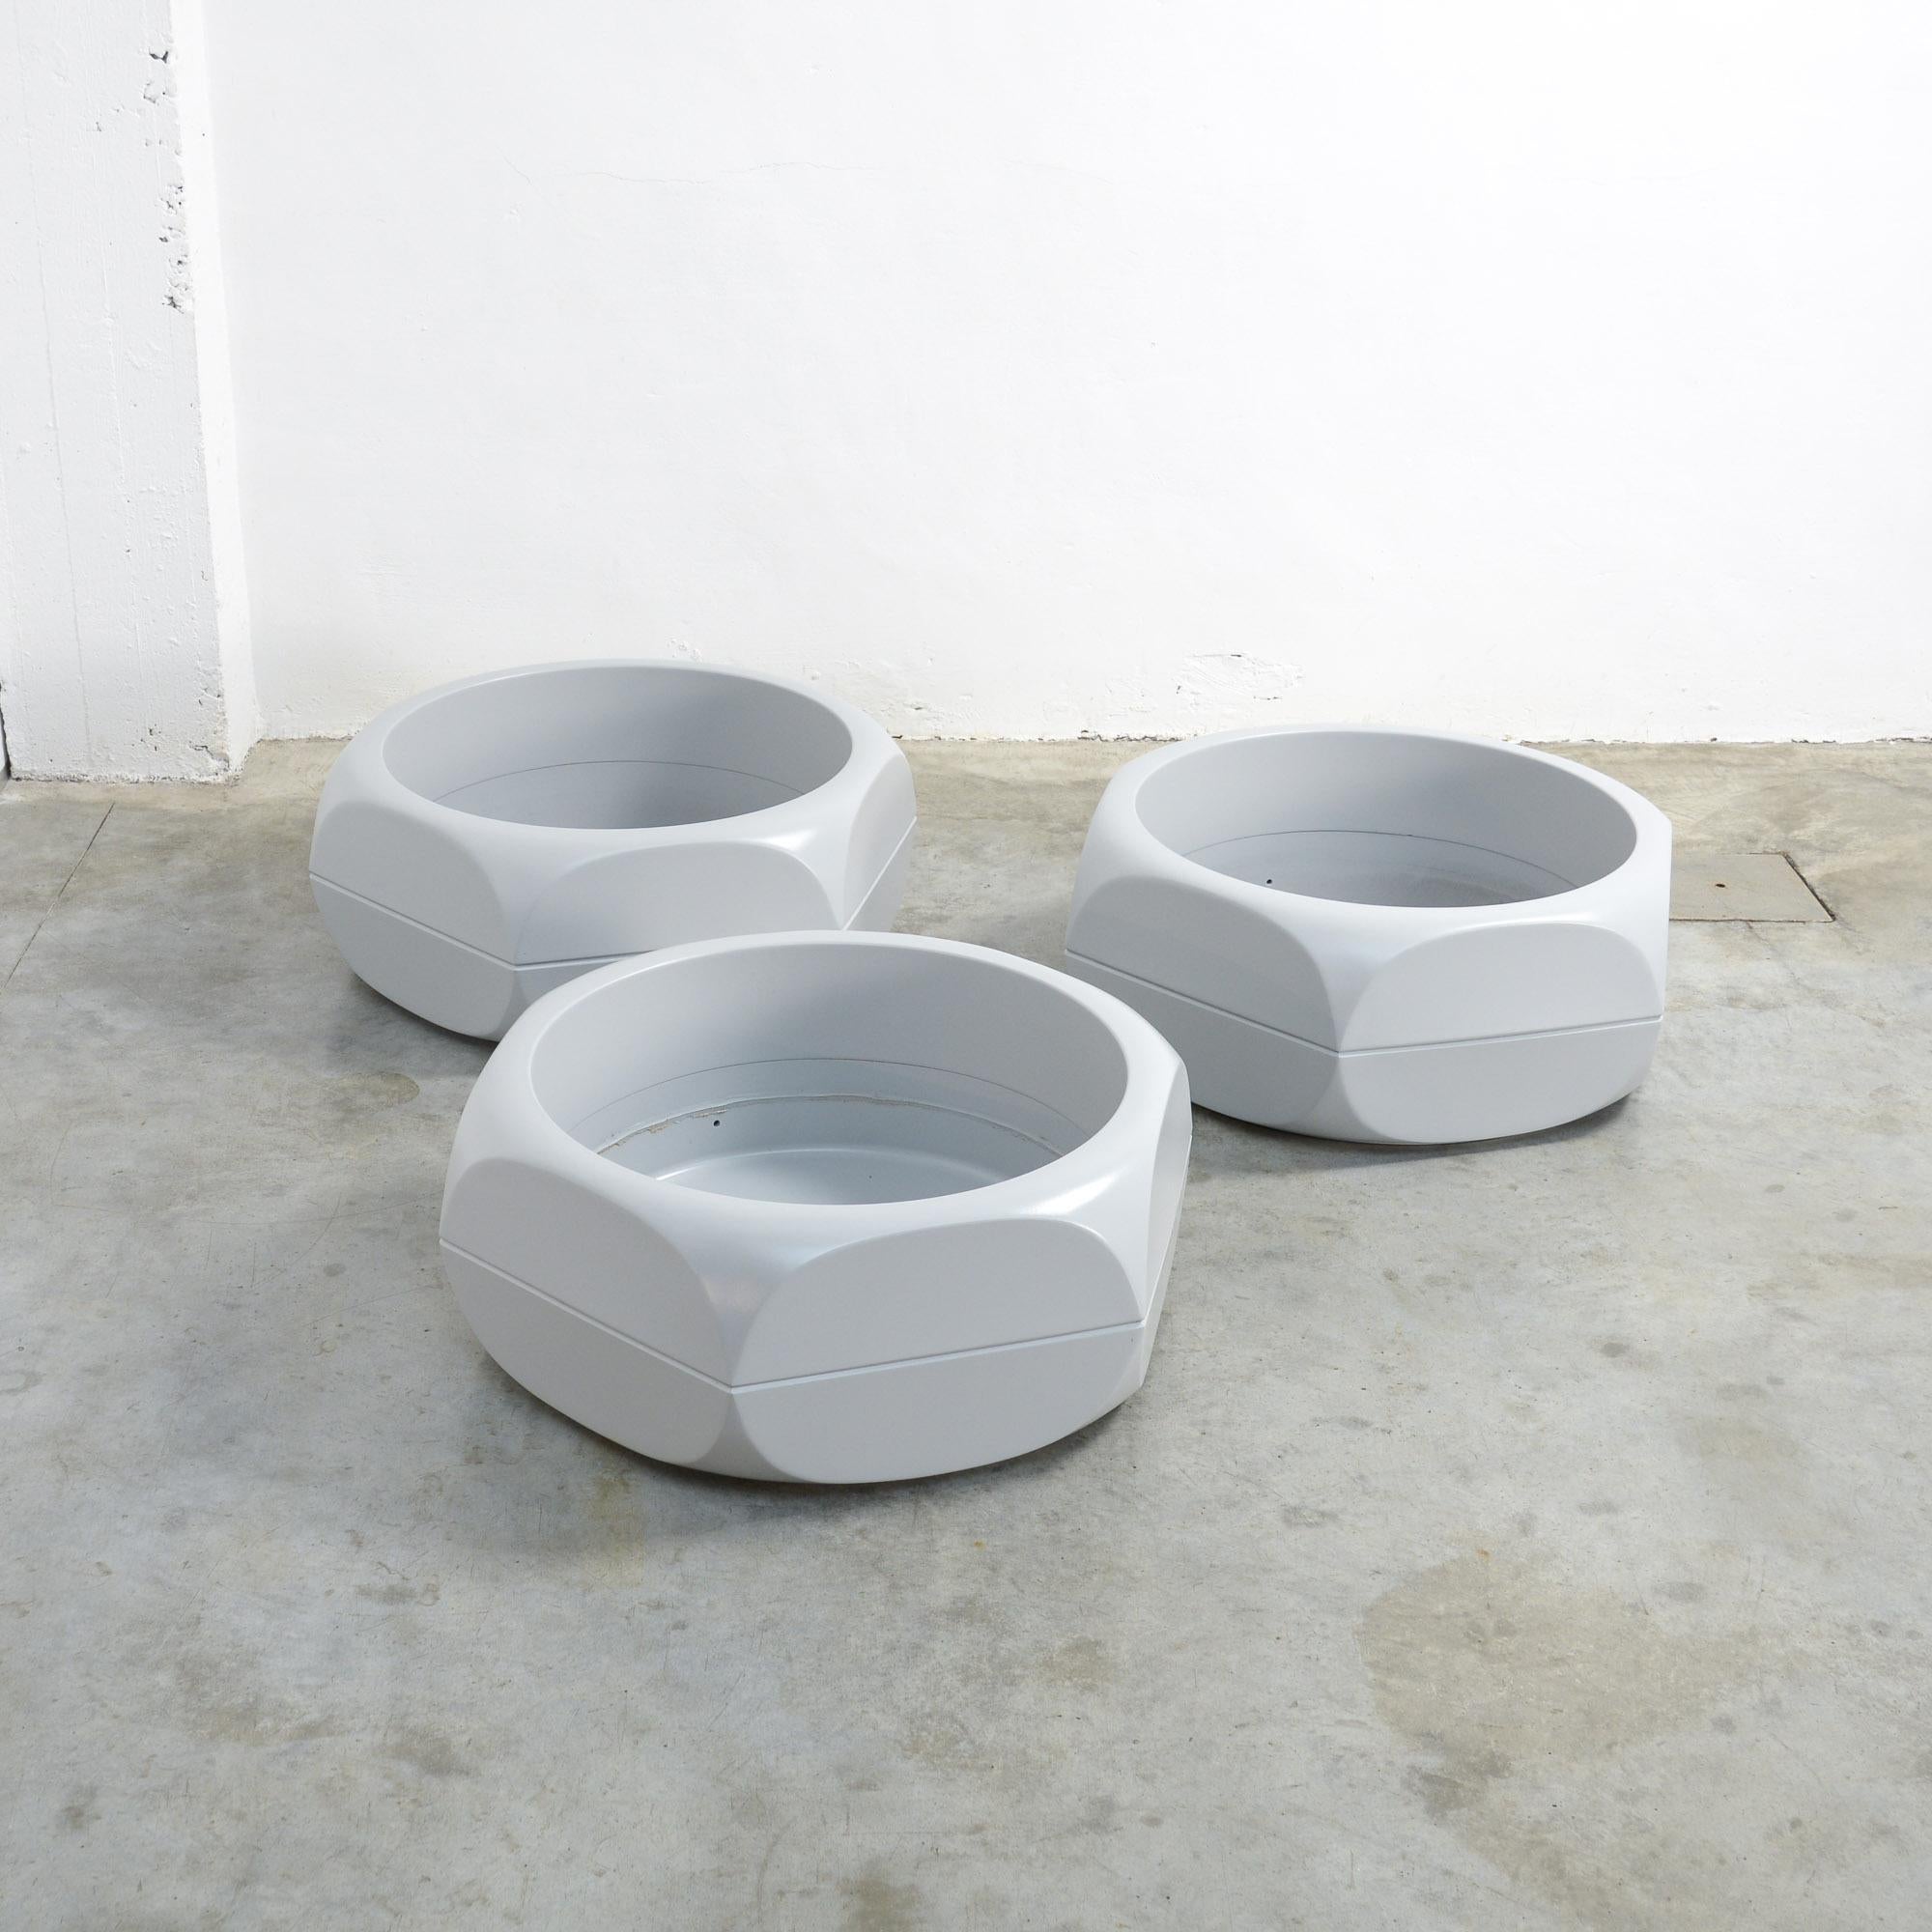 These large hexagonal planters can be dated in the 1970s. They are made in polyurethane. The shape was inspired by a nut.
The planters can be used outdoor or indoor.
They are repainted in light grey, so they are in perfect condition.

The price